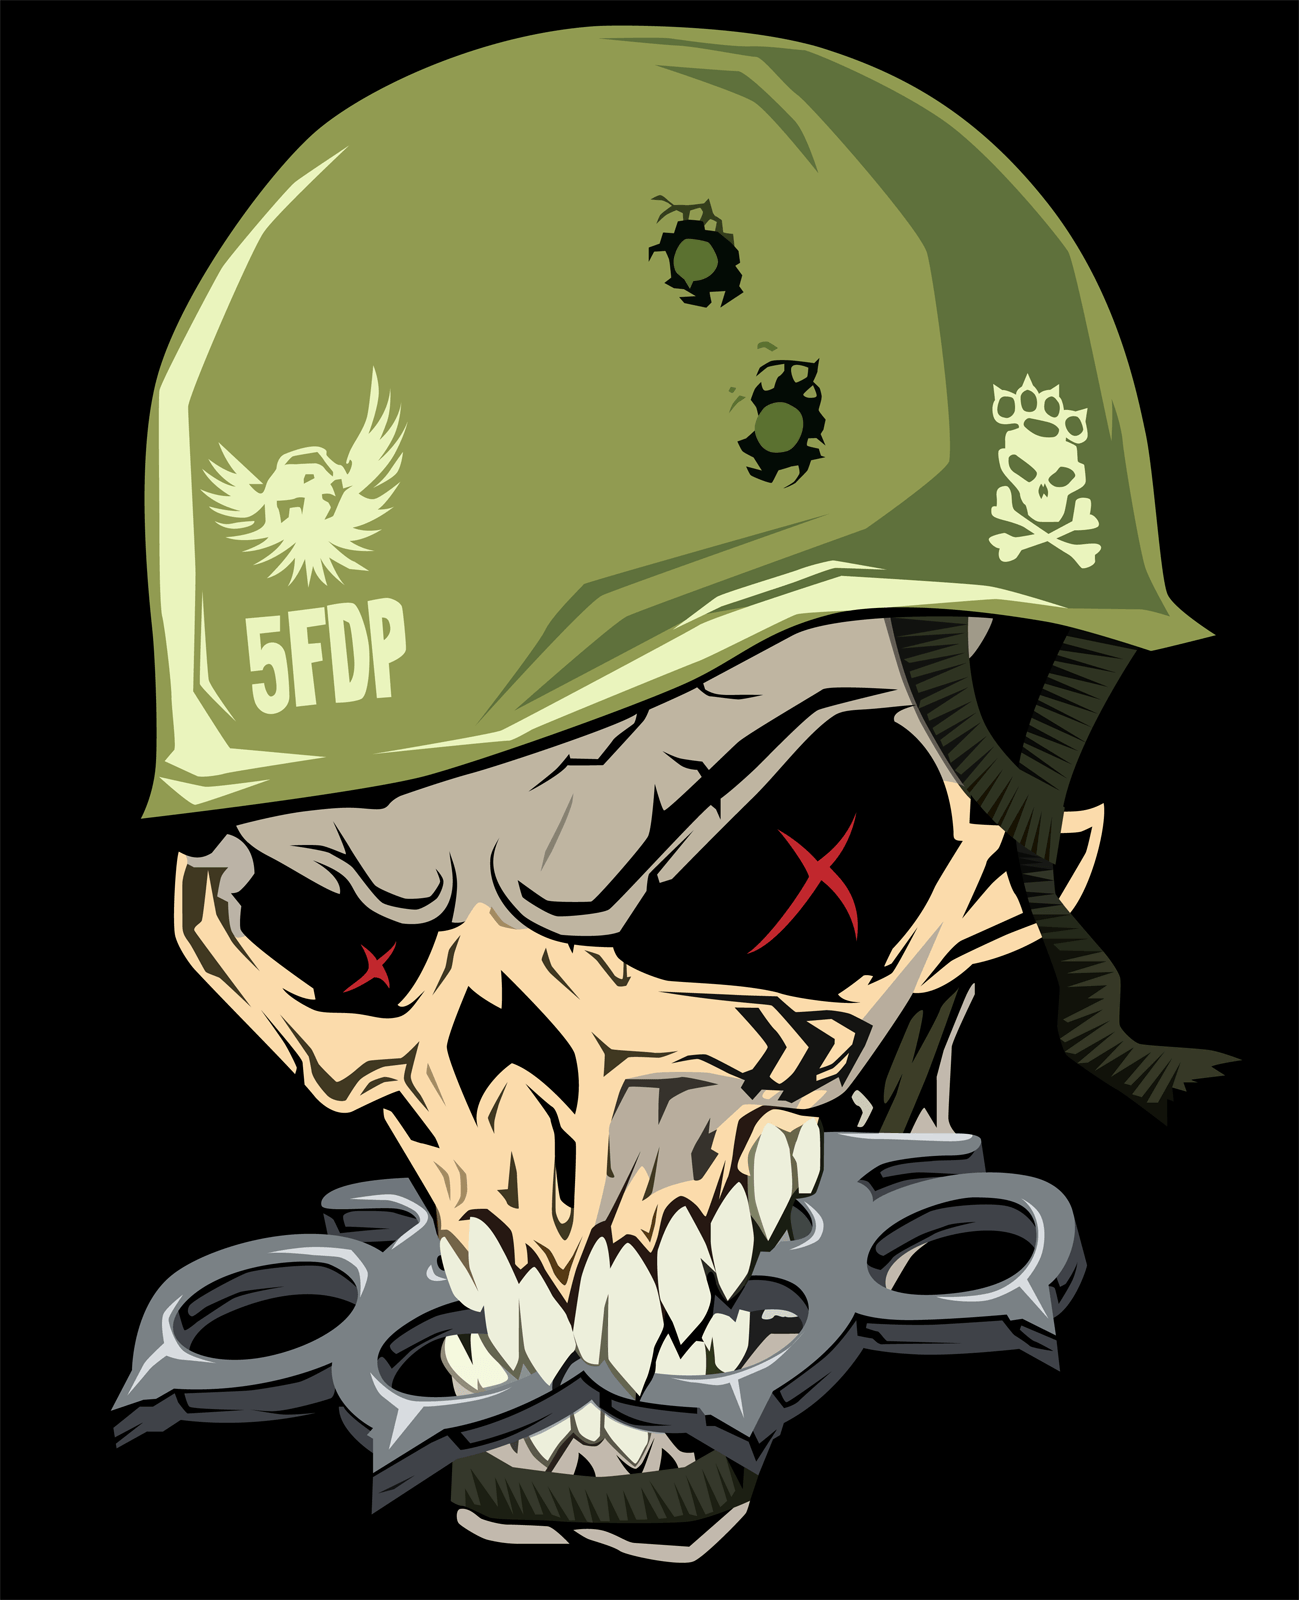 5FDP Eagle Logo - Military 5FDP | Bands/Music I love in 2019 | Five fingers, Finger, Death